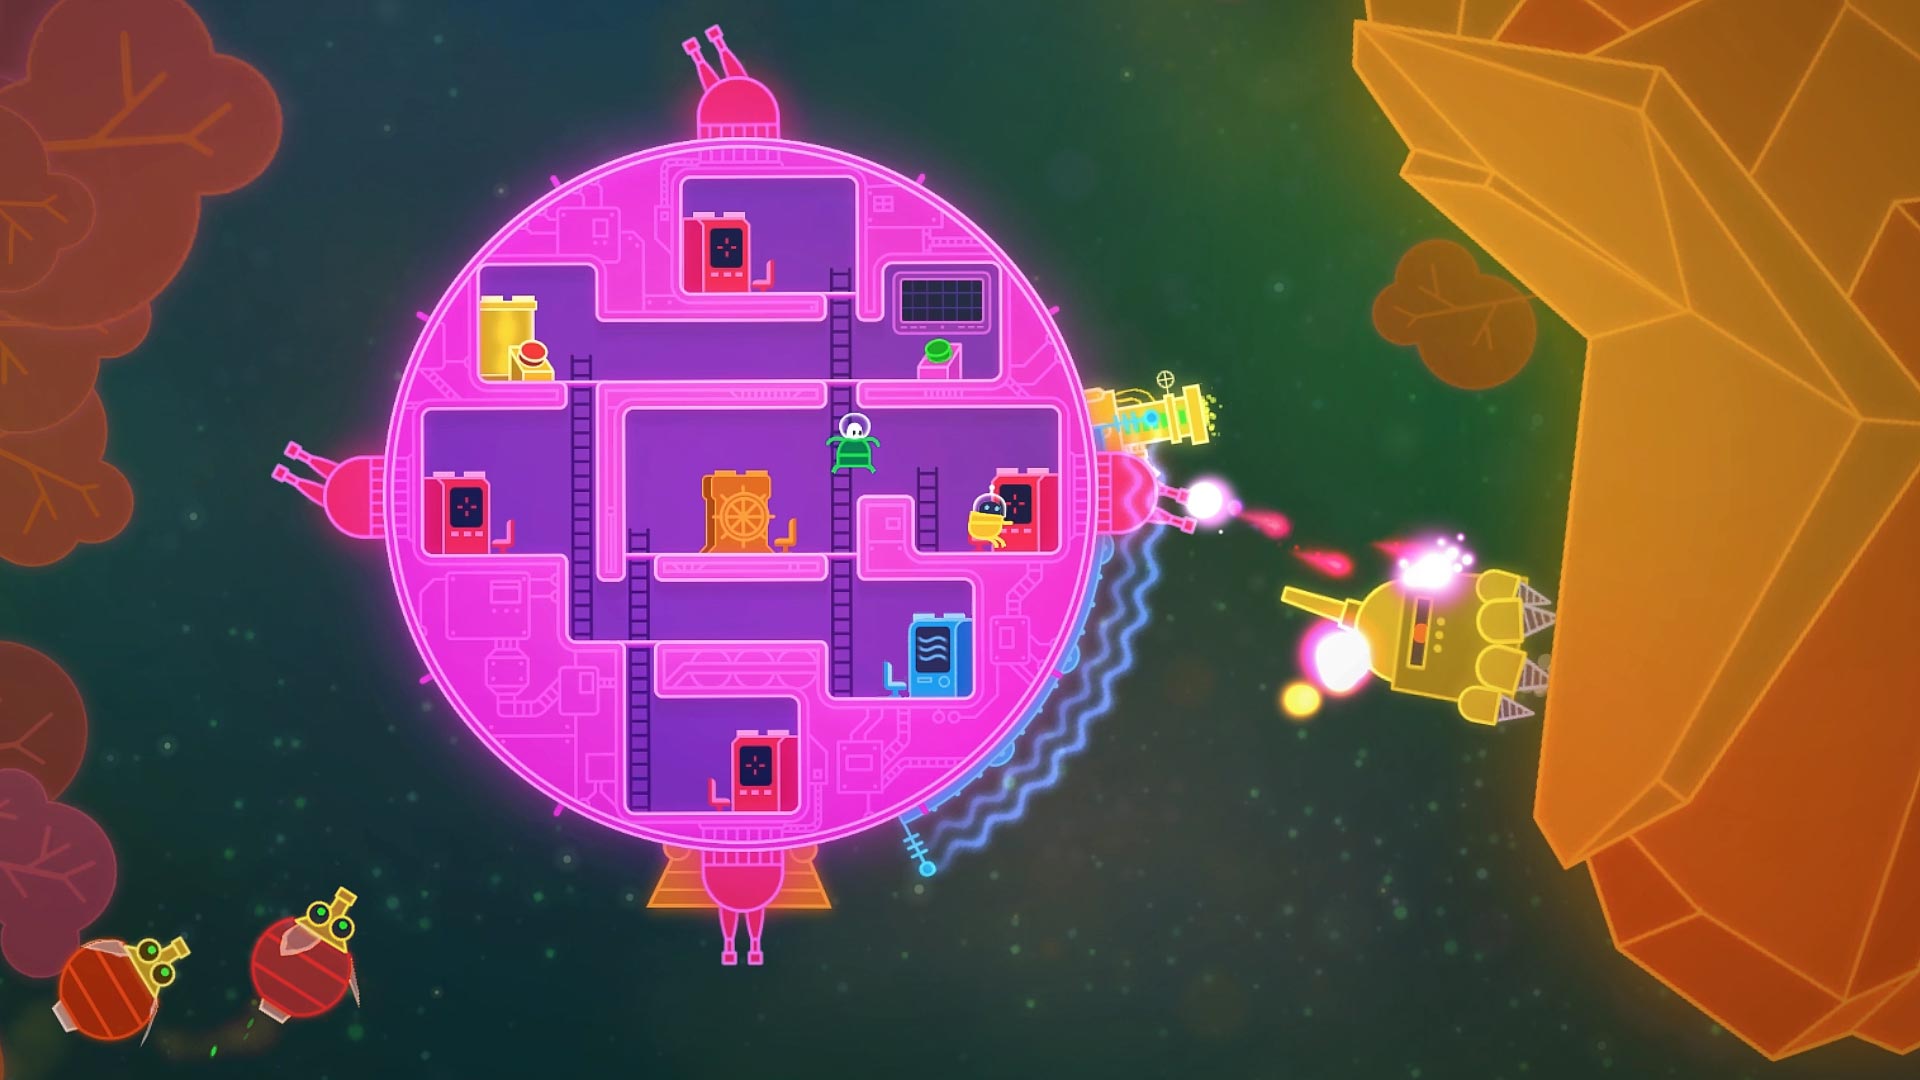 Lovers in a Dangerous Spacetime. Or as my girlfriend calls it “the pew pew spaceship game”. She loves it.

Also Diablo 3. We have a blast playing that, too.